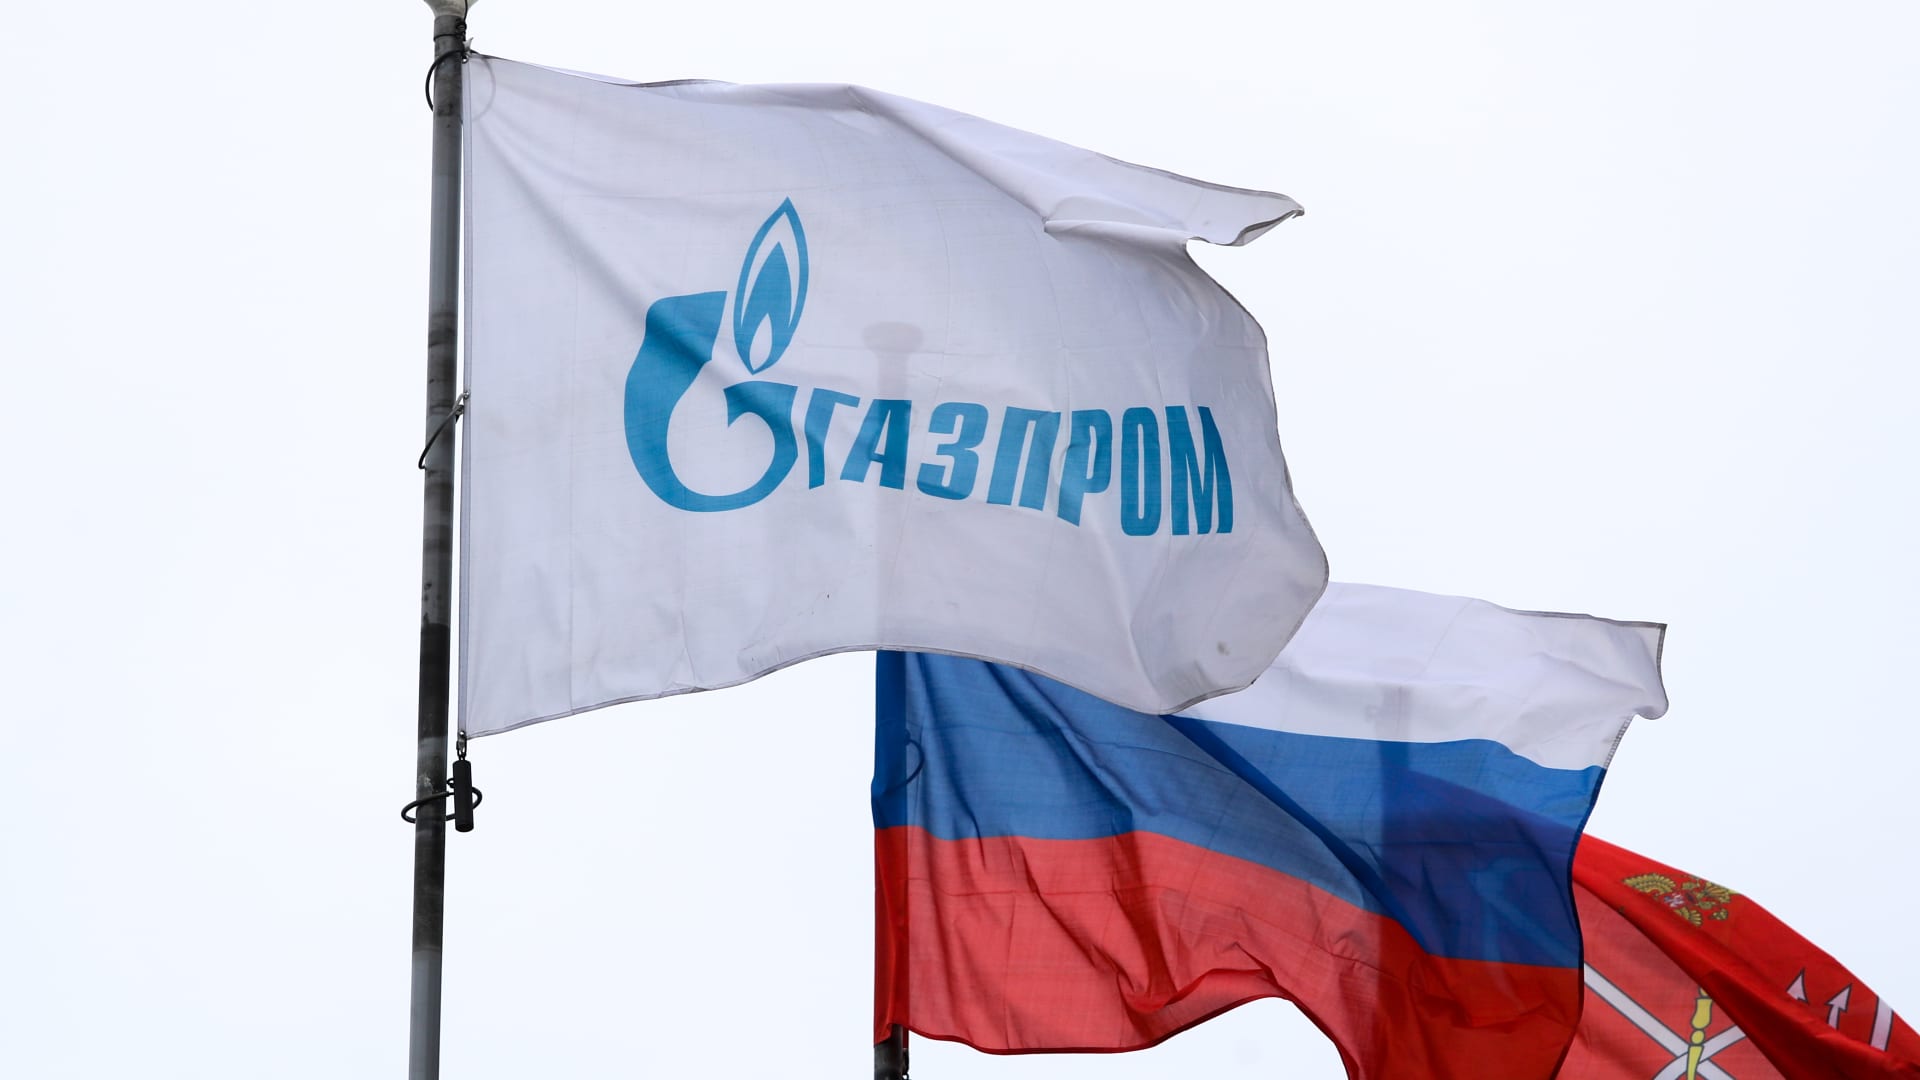 Poland's state-owned oil and gas company PGNiG said Russia's gas giant Gazprom had informed it on Tuesday that it would halt gas supplies that are delivered via the Yamal pipeline on Wednesday morning.